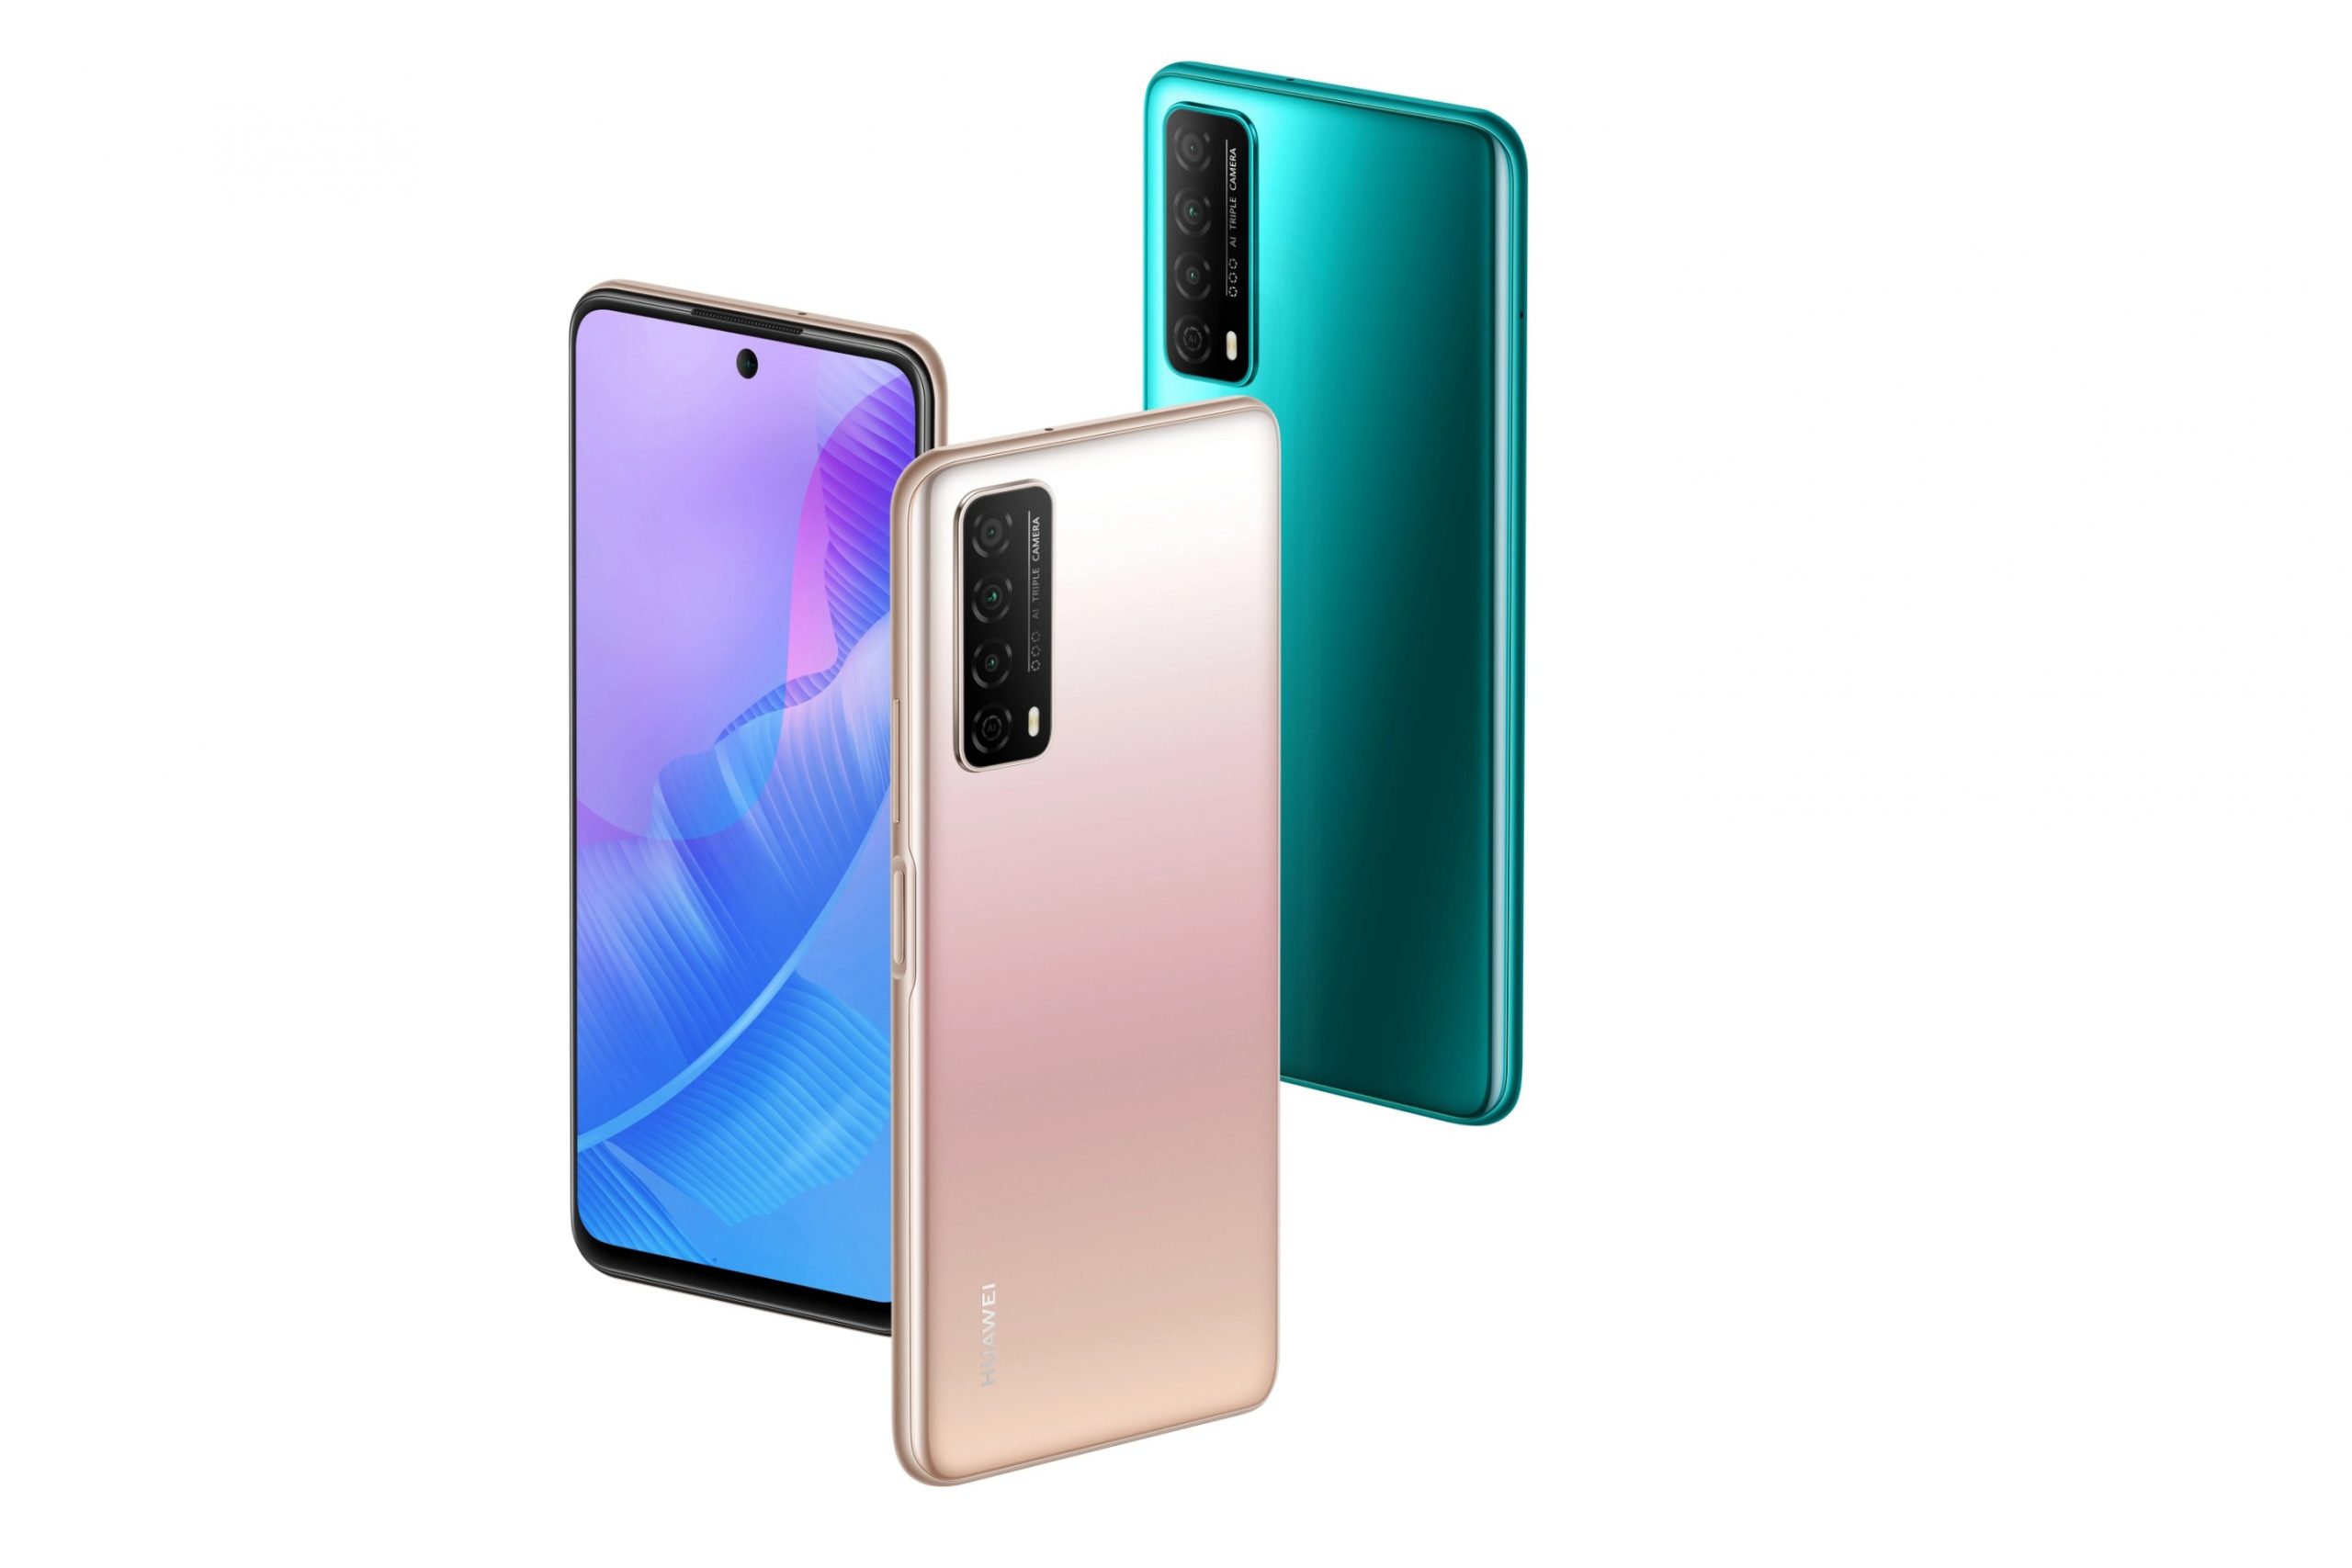 HUAWEI Enjoy 20 SE launched in China with Kirin 710A, 22.5W fast charging, and more